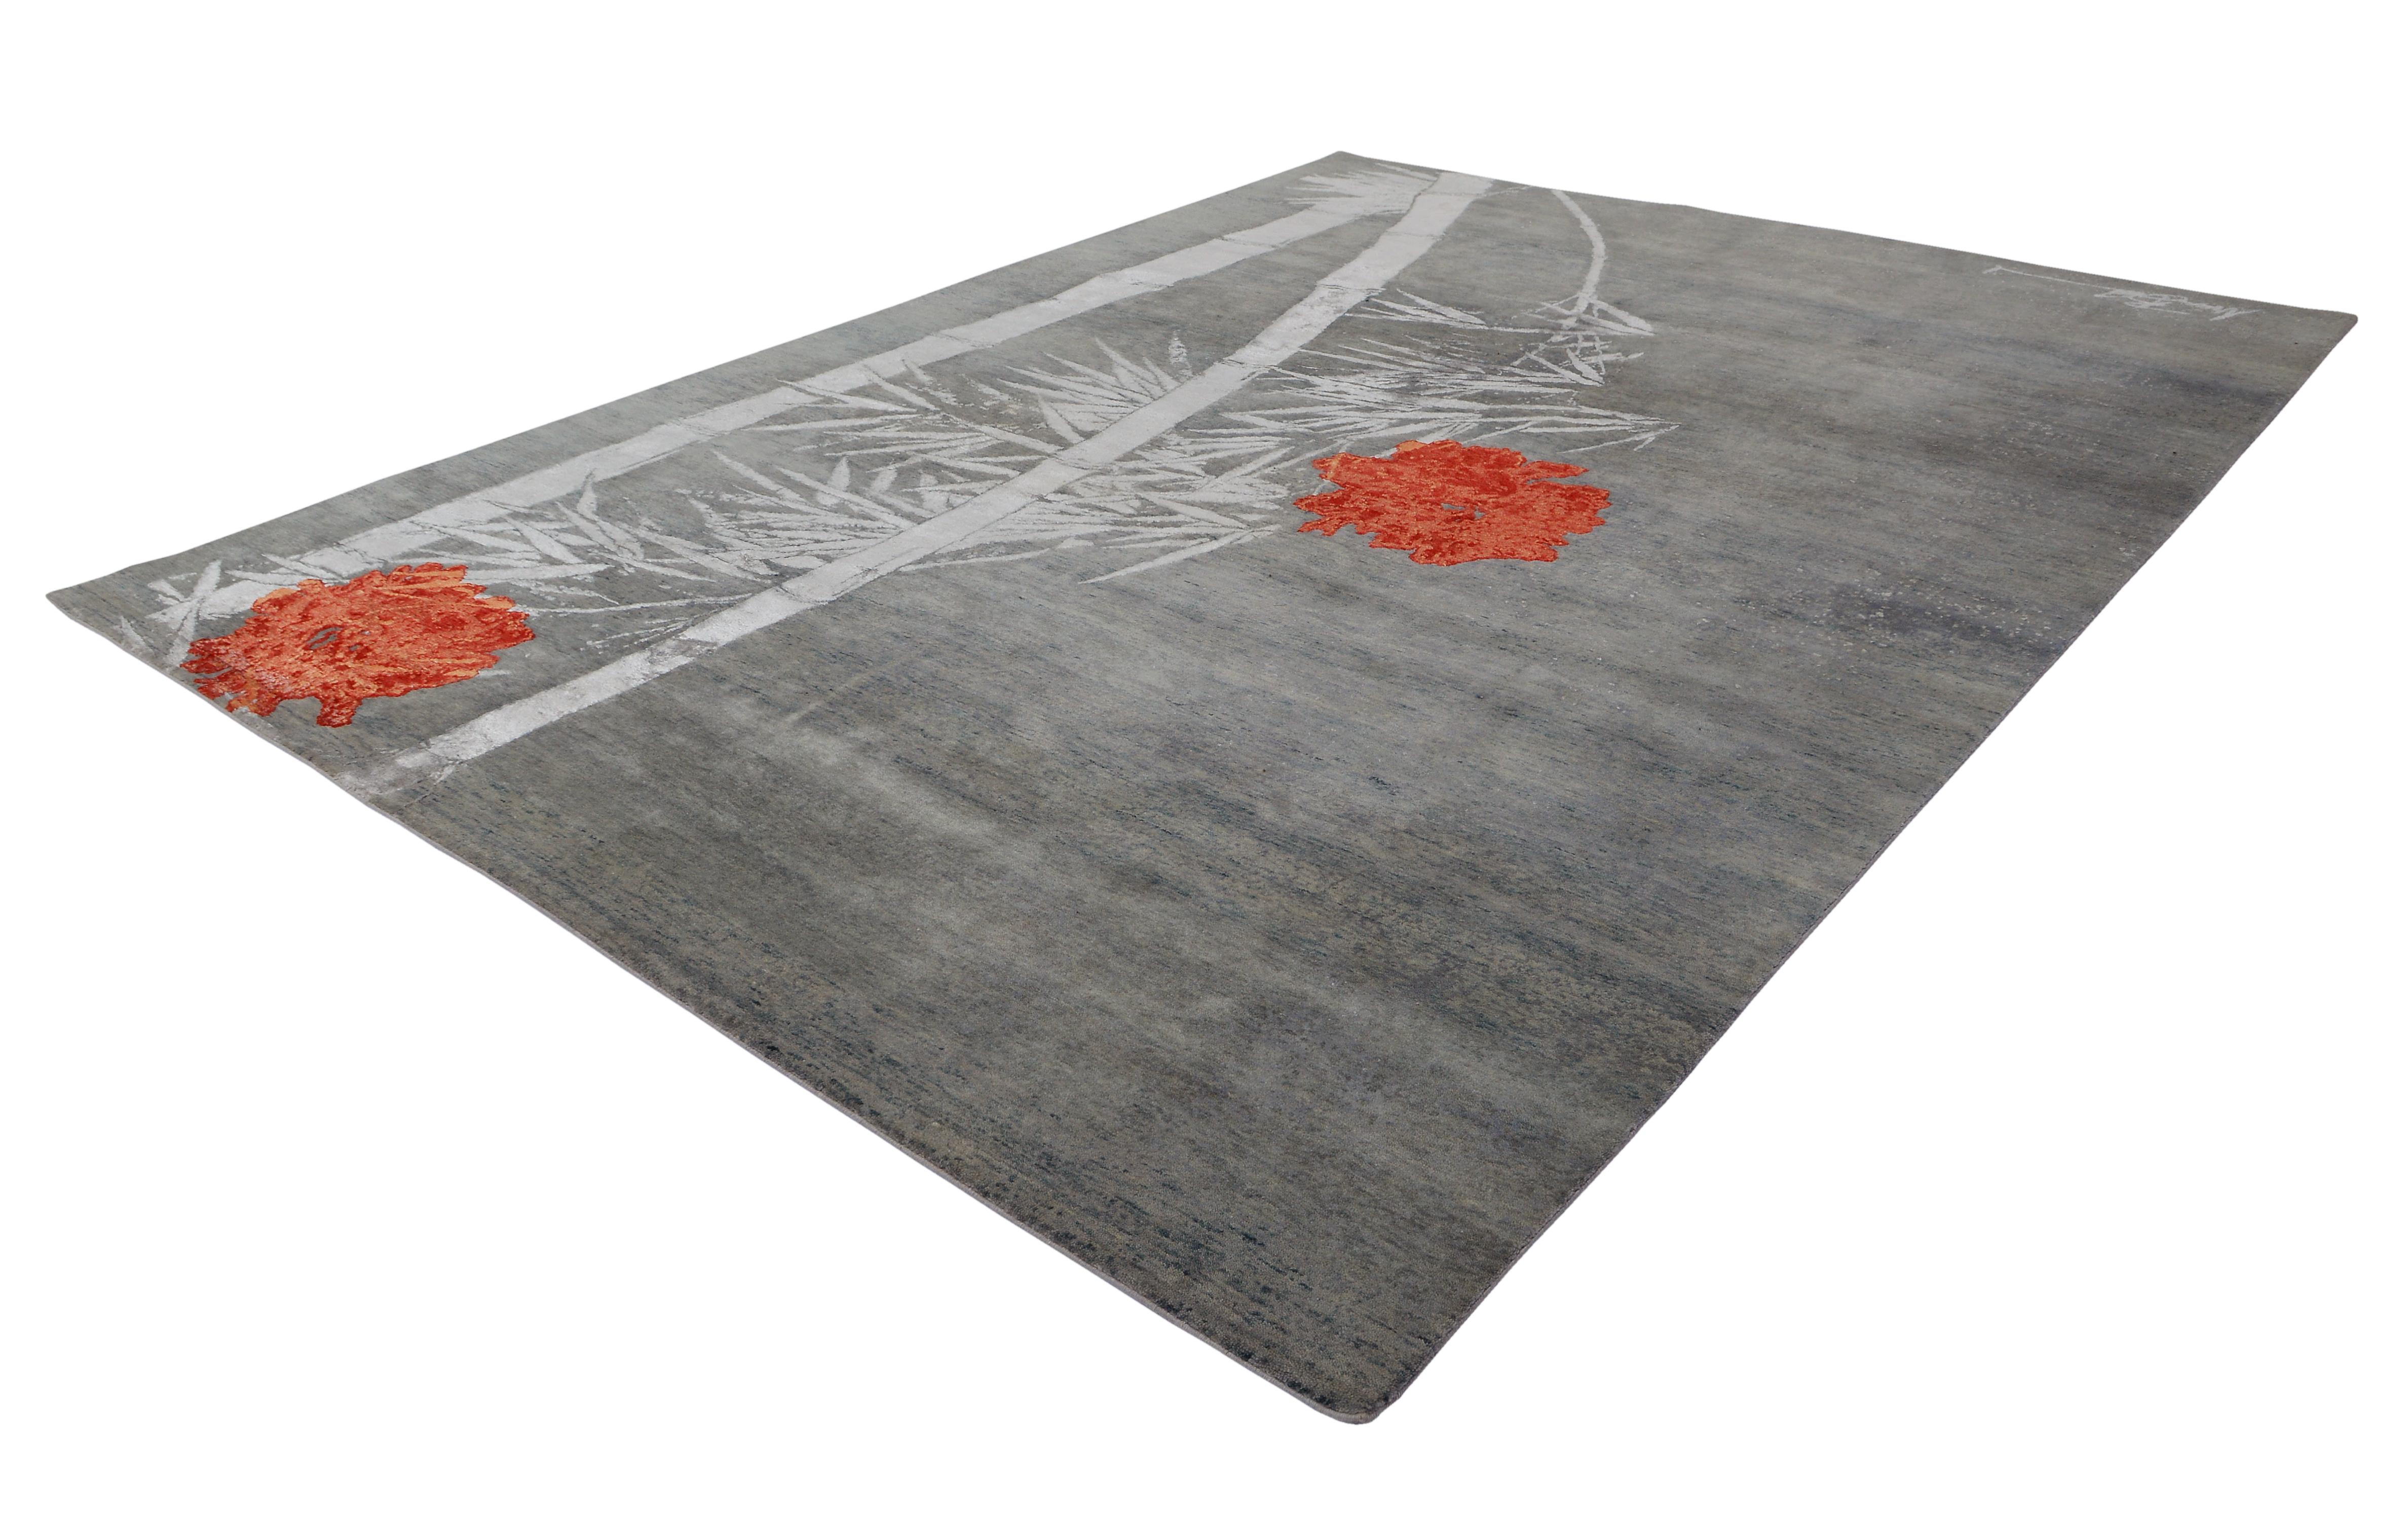 A new addition to the handmade rugs in the abstract rug line by Rug & Kilim, this 9' x 12'3” modern rug is hand knotted in a unique, proprietary blend of quality wool and silk, the natural luster of the latter bringing out transitional hues of